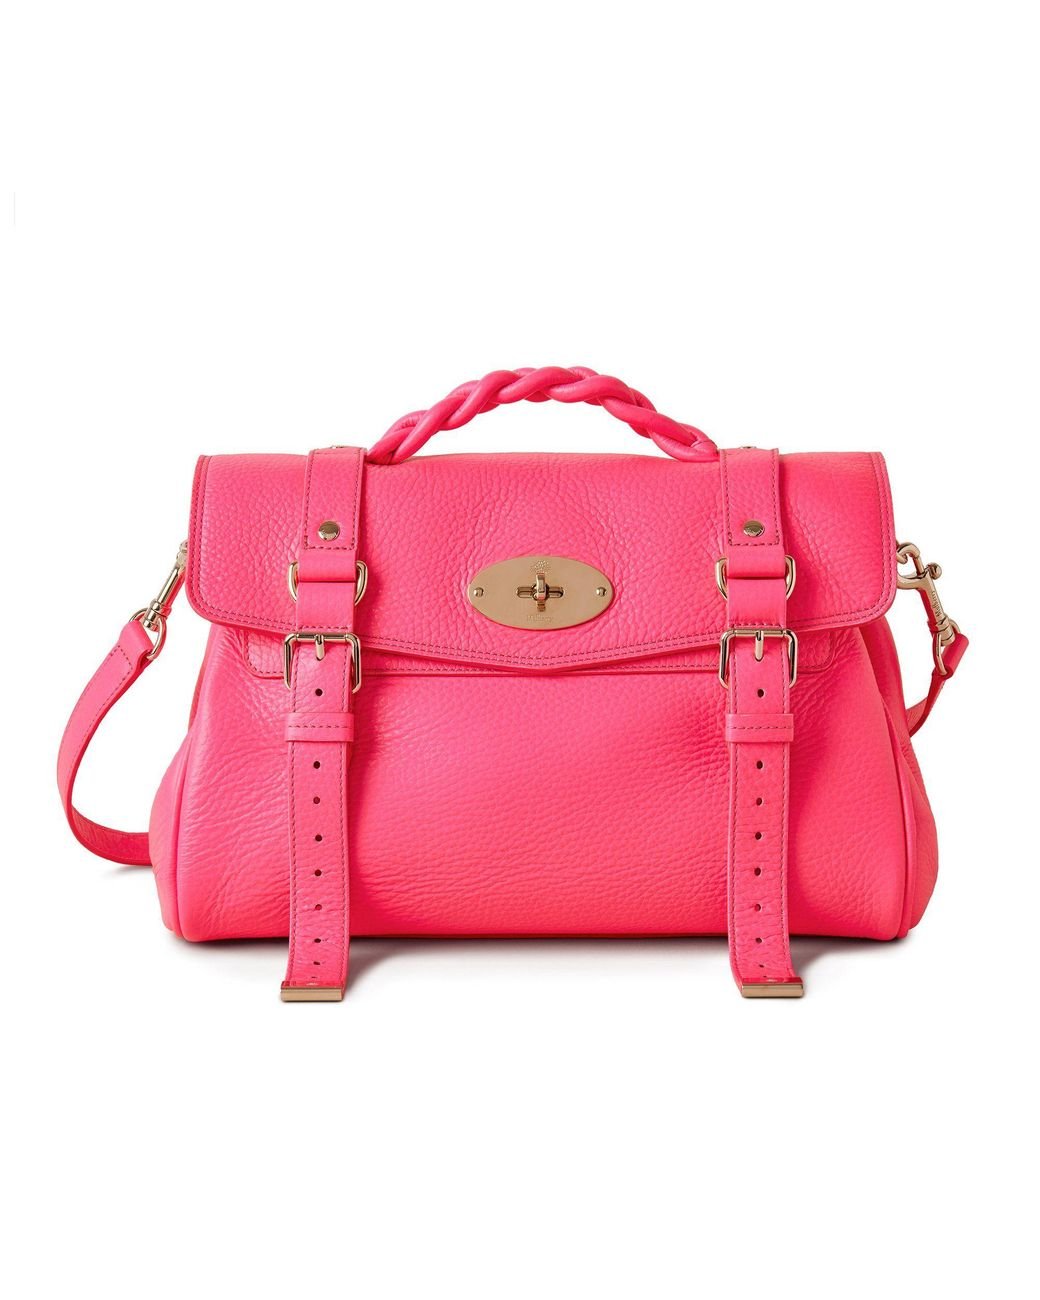 Mulberry Alexa Leather Bag in peach-pink